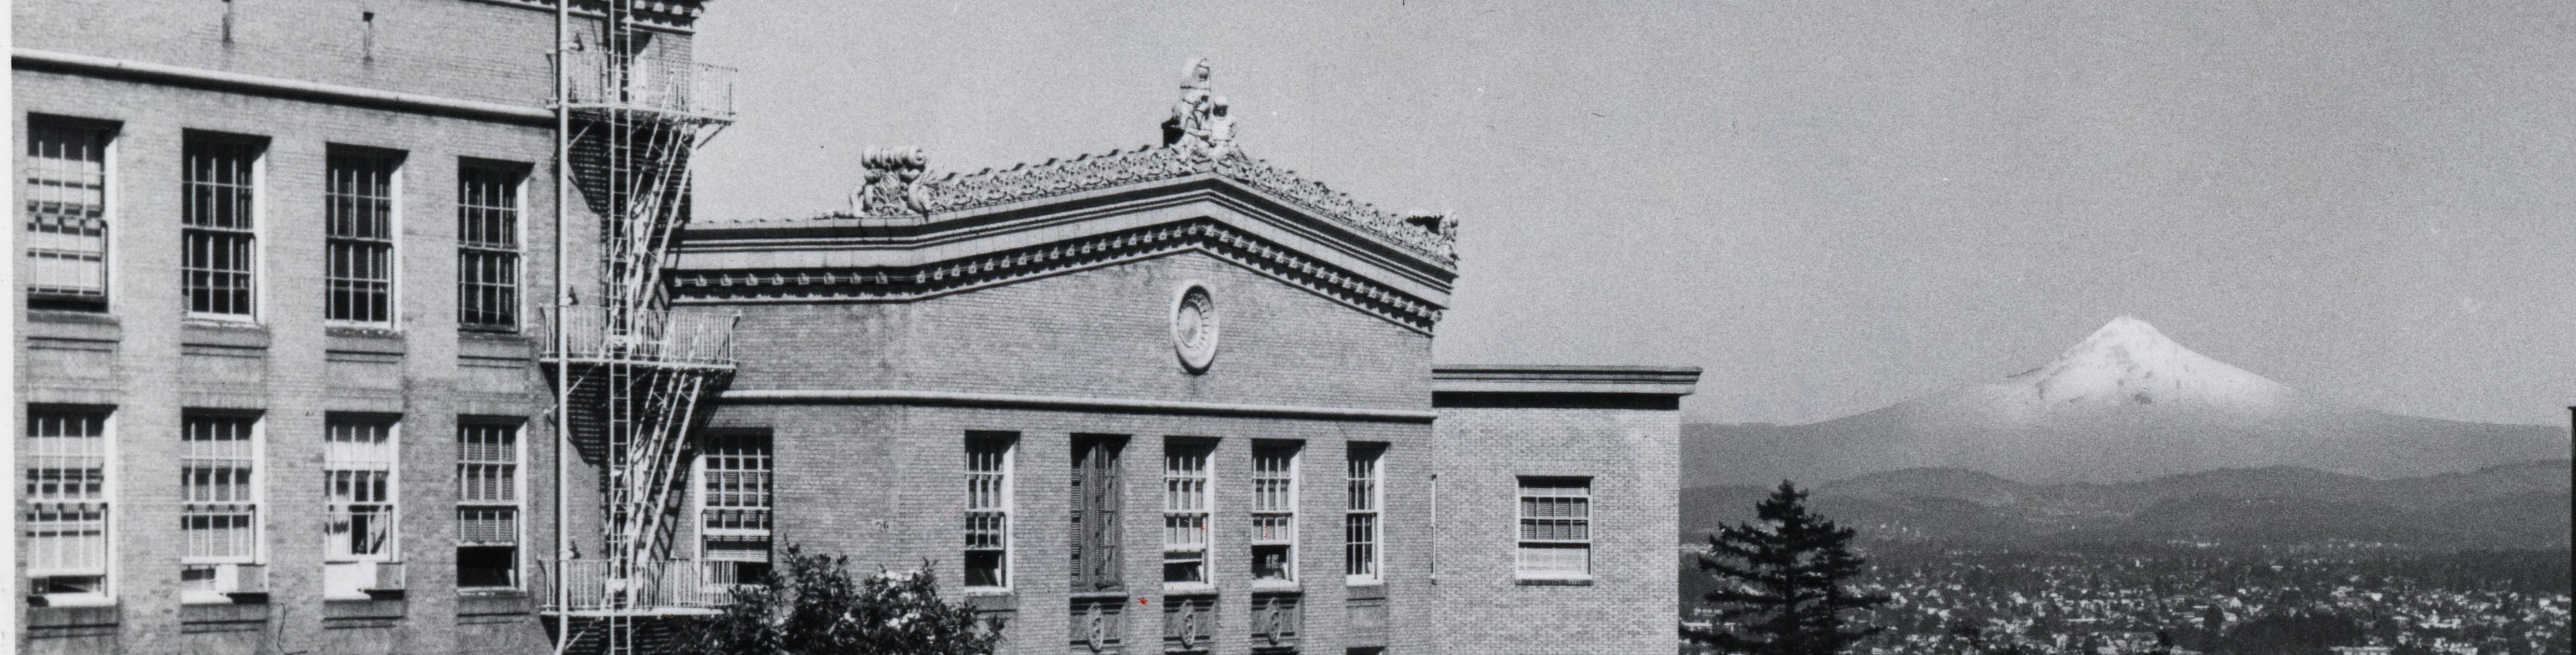 old photo of Mackenzie Hall, Baird Hall and Mt Hood cropped for radiology site